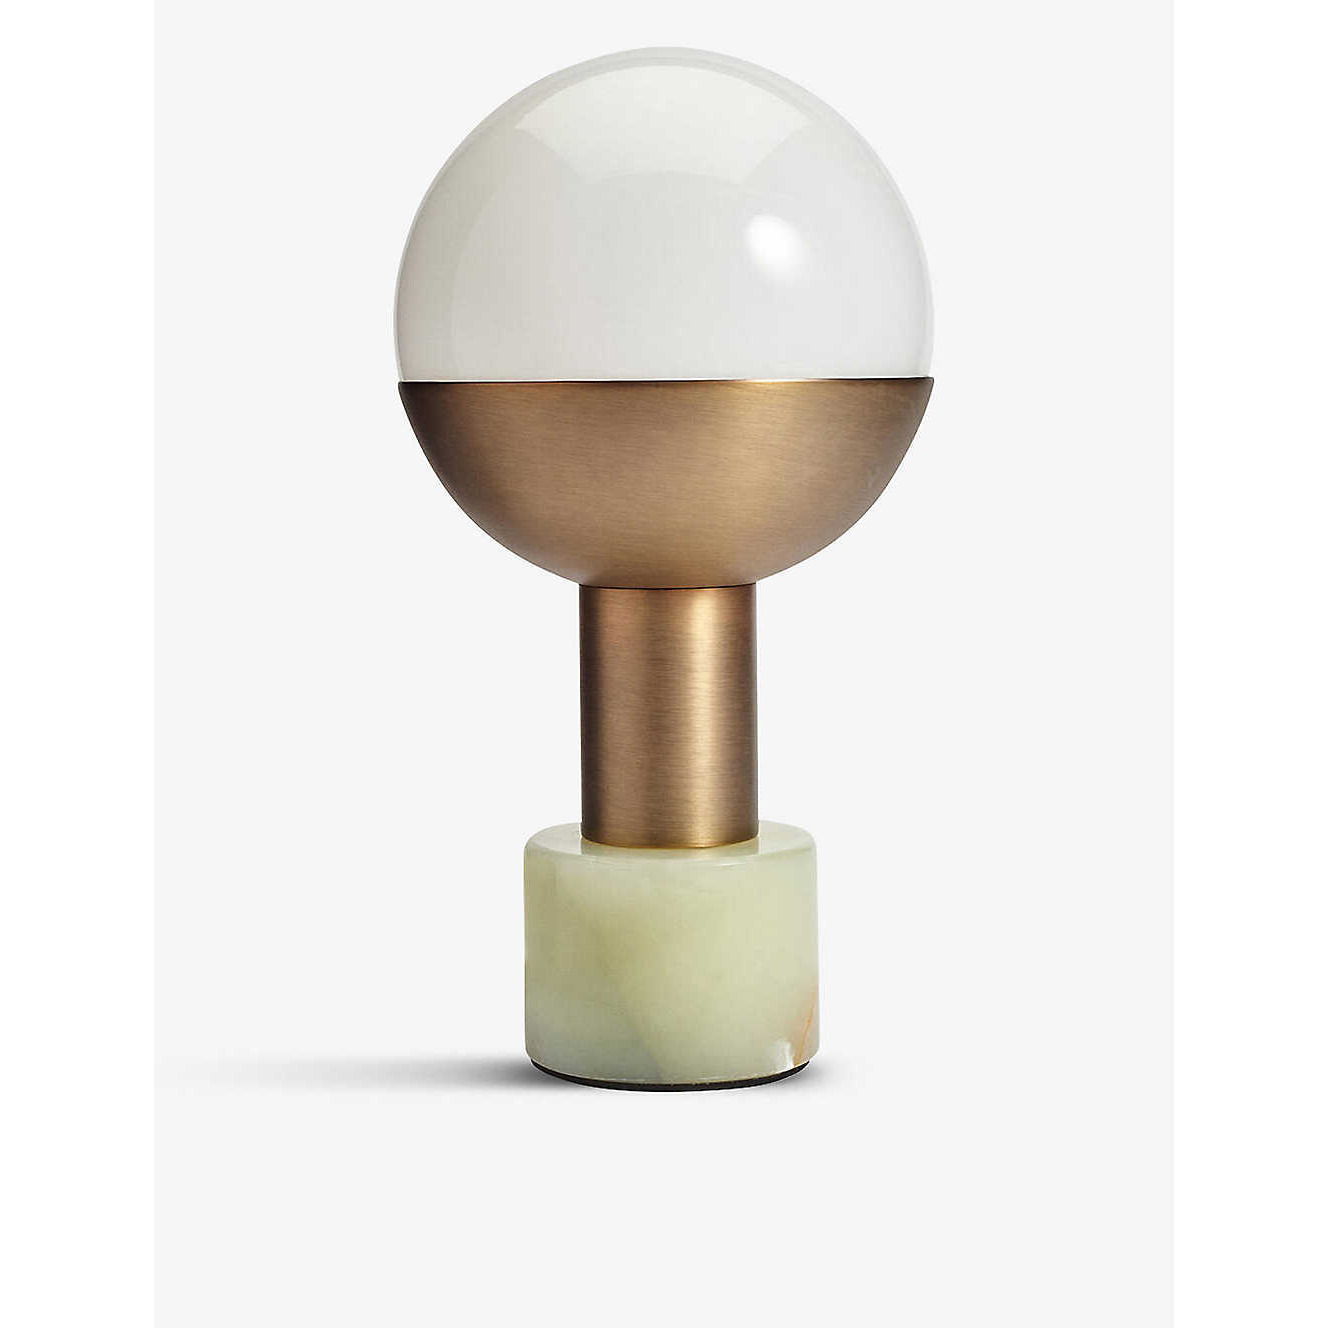 Madison onyx, brass and glass table lamp 33.9cm - image 1